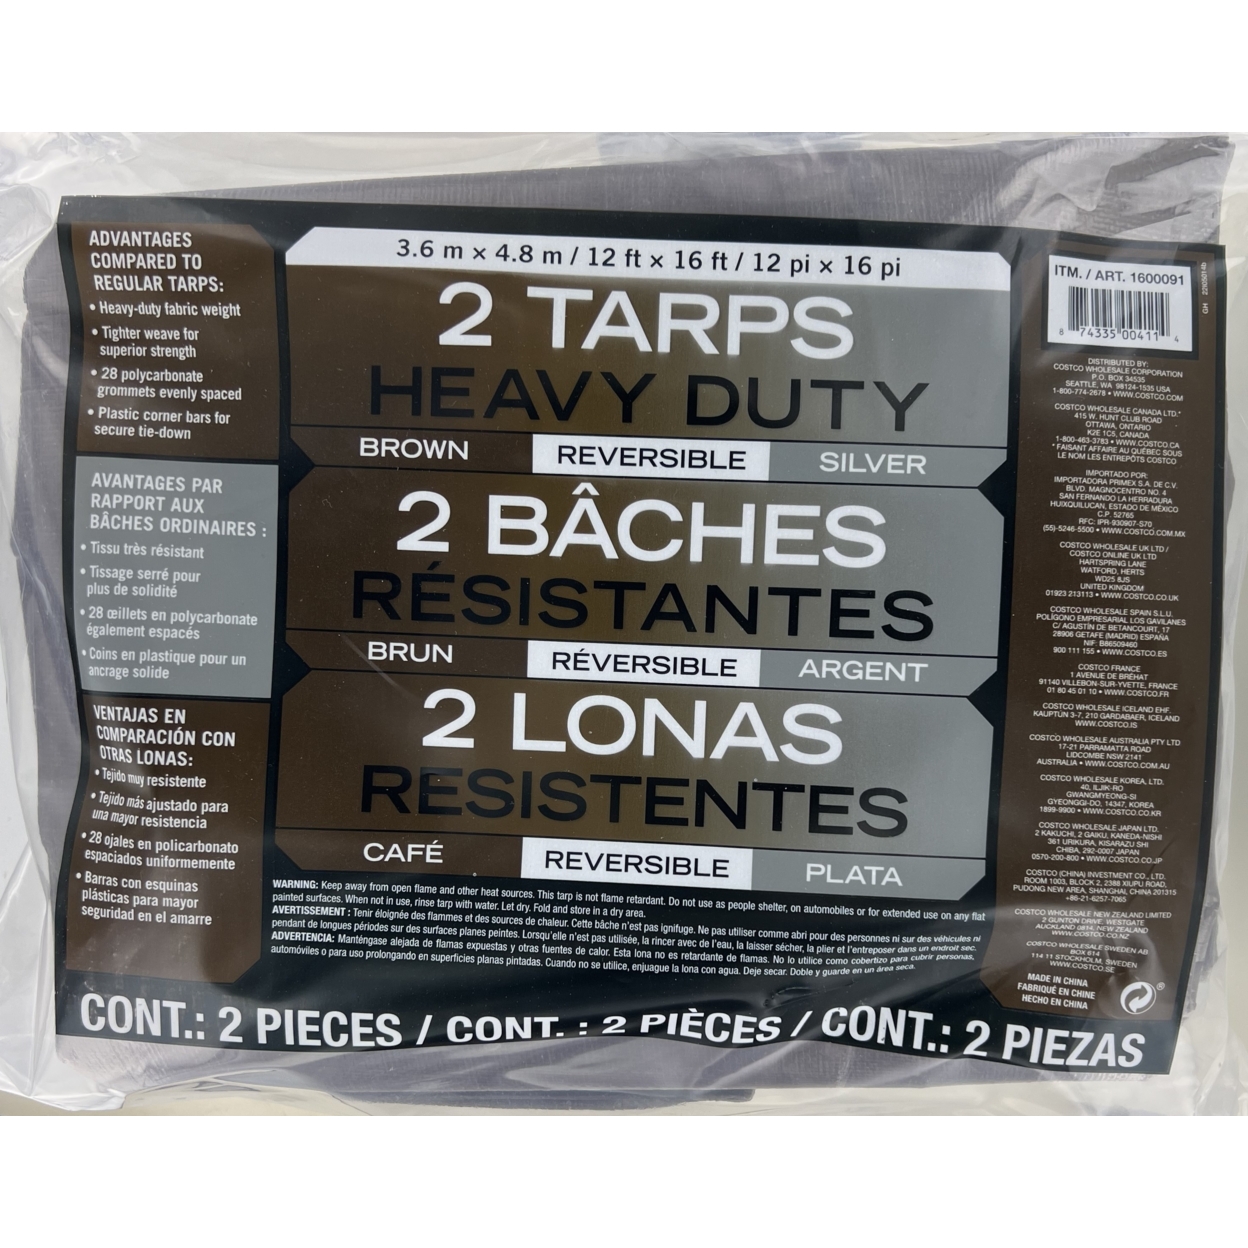 Heavy Duty Reversible Tarps, Brown And Silver, 12' X 16' (2 Pack)